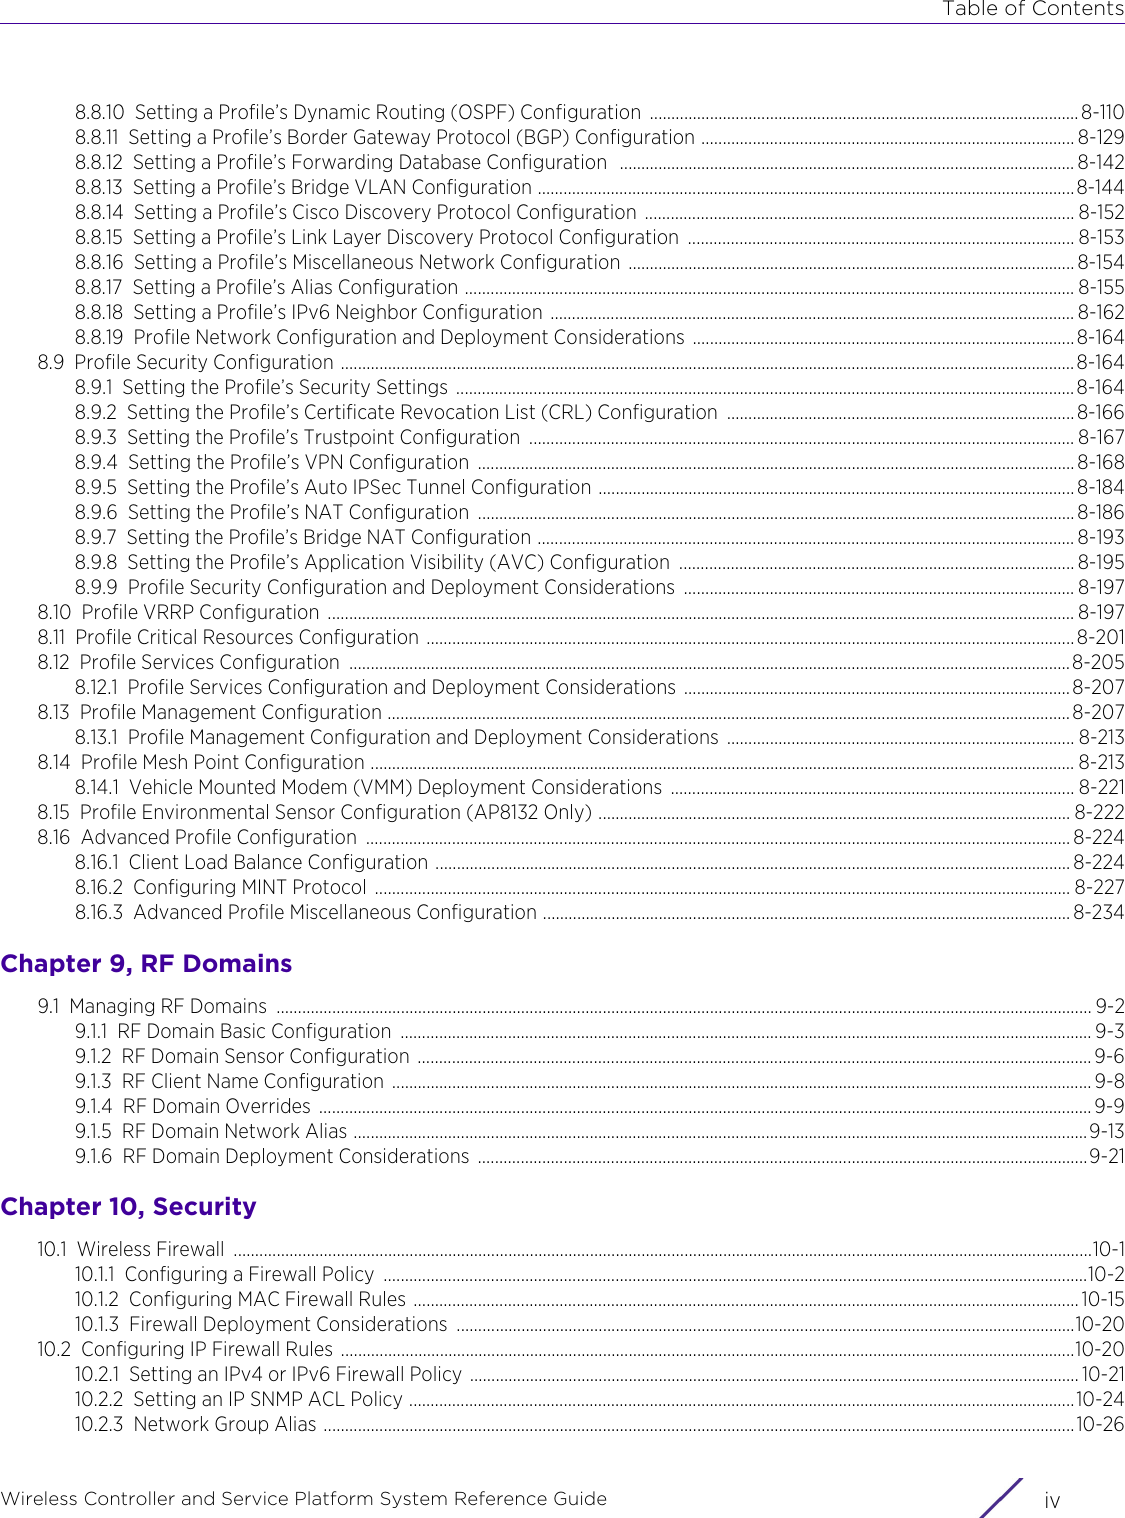 Table of ContentsWireless Controller and Service Platform System Reference Guide  iv8.8.10 Setting a Profile’s Dynamic Routing (OSPF) Configuration .................................................................................................... 8-1108.8.11 Setting a Profile’s Border Gateway Protocol (BGP) Configuration ....................................................................................... 8-1298.8.12 Setting a Profile’s Forwarding Database Configuration  .......................................................................................................... 8-1428.8.13 Setting a Profile’s Bridge VLAN Configuration .............................................................................................................................8-1448.8.14 Setting a Profile’s Cisco Discovery Protocol Configuration  .................................................................................................... 8-1528.8.15 Setting a Profile’s Link Layer Discovery Protocol Configuration  .......................................................................................... 8-1538.8.16 Setting a Profile’s Miscellaneous Network Configuration ........................................................................................................ 8-1548.8.17 Setting a Profile’s Alias Configuration .............................................................................................................................................. 8-1558.8.18 Setting a Profile’s IPv6 Neighbor Configuration .......................................................................................................................... 8-1628.8.19 Profile Network Configuration and Deployment Considerations ......................................................................................... 8-1648.9 Profile Security Configuration ...........................................................................................................................................................................8-1648.9.1 Setting the Profile’s Security Settings  ................................................................................................................................................8-1648.9.2 Setting the Profile’s Certificate Revocation List (CRL) Configuration  ................................................................................. 8-1668.9.3 Setting the Profile’s Trustpoint Configuration  ............................................................................................................................... 8-1678.9.4 Setting the Profile’s VPN Configuration  ........................................................................................................................................... 8-1688.9.5 Setting the Profile’s Auto IPSec Tunnel Configuration ............................................................................................................... 8-1848.9.6 Setting the Profile’s NAT Configuration  ........................................................................................................................................... 8-1868.9.7 Setting the Profile’s Bridge NAT Configuration ............................................................................................................................. 8-1938.9.8 Setting the Profile’s Application Visibility (AVC) Configuration  ............................................................................................ 8-1958.9.9 Profile Security Configuration and Deployment Considerations ........................................................................................... 8-1978.10 Profile VRRP Configuration  .............................................................................................................................................................................. 8-1978.11 Profile Critical Resources Configuration ....................................................................................................................................................... 8-2018.12 Profile Services Configuration  ........................................................................................................................................................................8-2058.12.1 Profile Services Configuration and Deployment Considerations ..........................................................................................8-2078.13 Profile Management Configuration ............................................................................................................................................................... 8-2078.13.1 Profile Management Configuration and Deployment Considerations ................................................................................. 8-2138.14 Profile Mesh Point Configuration .................................................................................................................................................................... 8-2138.14.1 Vehicle Mounted Modem (VMM) Deployment Considerations  .............................................................................................. 8-2218.15 Profile Environmental Sensor Configuration (AP8132 Only) .............................................................................................................. 8-2228.16 Advanced Profile Configuration  .................................................................................................................................................................... 8-2248.16.1 Client Load Balance Configuration .................................................................................................................................................... 8-2248.16.2 Configuring MINT Protocol  .................................................................................................................................................................. 8-2278.16.3 Advanced Profile Miscellaneous Configuration ........................................................................................................................... 8-234Chapter 9, RF Domains9.1 Managing RF Domains  .............................................................................................................................................................................................. 9-29.1.1 RF Domain Basic Configuration  ................................................................................................................................................................. 9-39.1.2 RF Domain Sensor Configuration  ............................................................................................................................................................. 9-69.1.3 RF Client Name Configuration ................................................................................................................................................................... 9-89.1.4 RF Domain Overrides  .................................................................................................................................................................................... 9-99.1.5 RF Domain Network Alias ...........................................................................................................................................................................9-139.1.6 RF Domain Deployment Considerations  ..............................................................................................................................................9-21Chapter 10, Security10.1 Wireless Firewall  ........................................................................................................................................................................................................10-110.1.1 Configuring a Firewall Policy  ....................................................................................................................................................................10-210.1.2 Configuring MAC Firewall Rules ........................................................................................................................................................... 10-1510.1.3 Firewall Deployment Considerations  ................................................................................................................................................10-2010.2 Configuring IP Firewall Rules  ...........................................................................................................................................................................10-2010.2.1 Setting an IPv4 or IPv6 Firewall Policy .............................................................................................................................................. 10-2110.2.2 Setting an IP SNMP ACL Policy ...........................................................................................................................................................10-2410.2.3 Network Group Alias ...............................................................................................................................................................................10-26